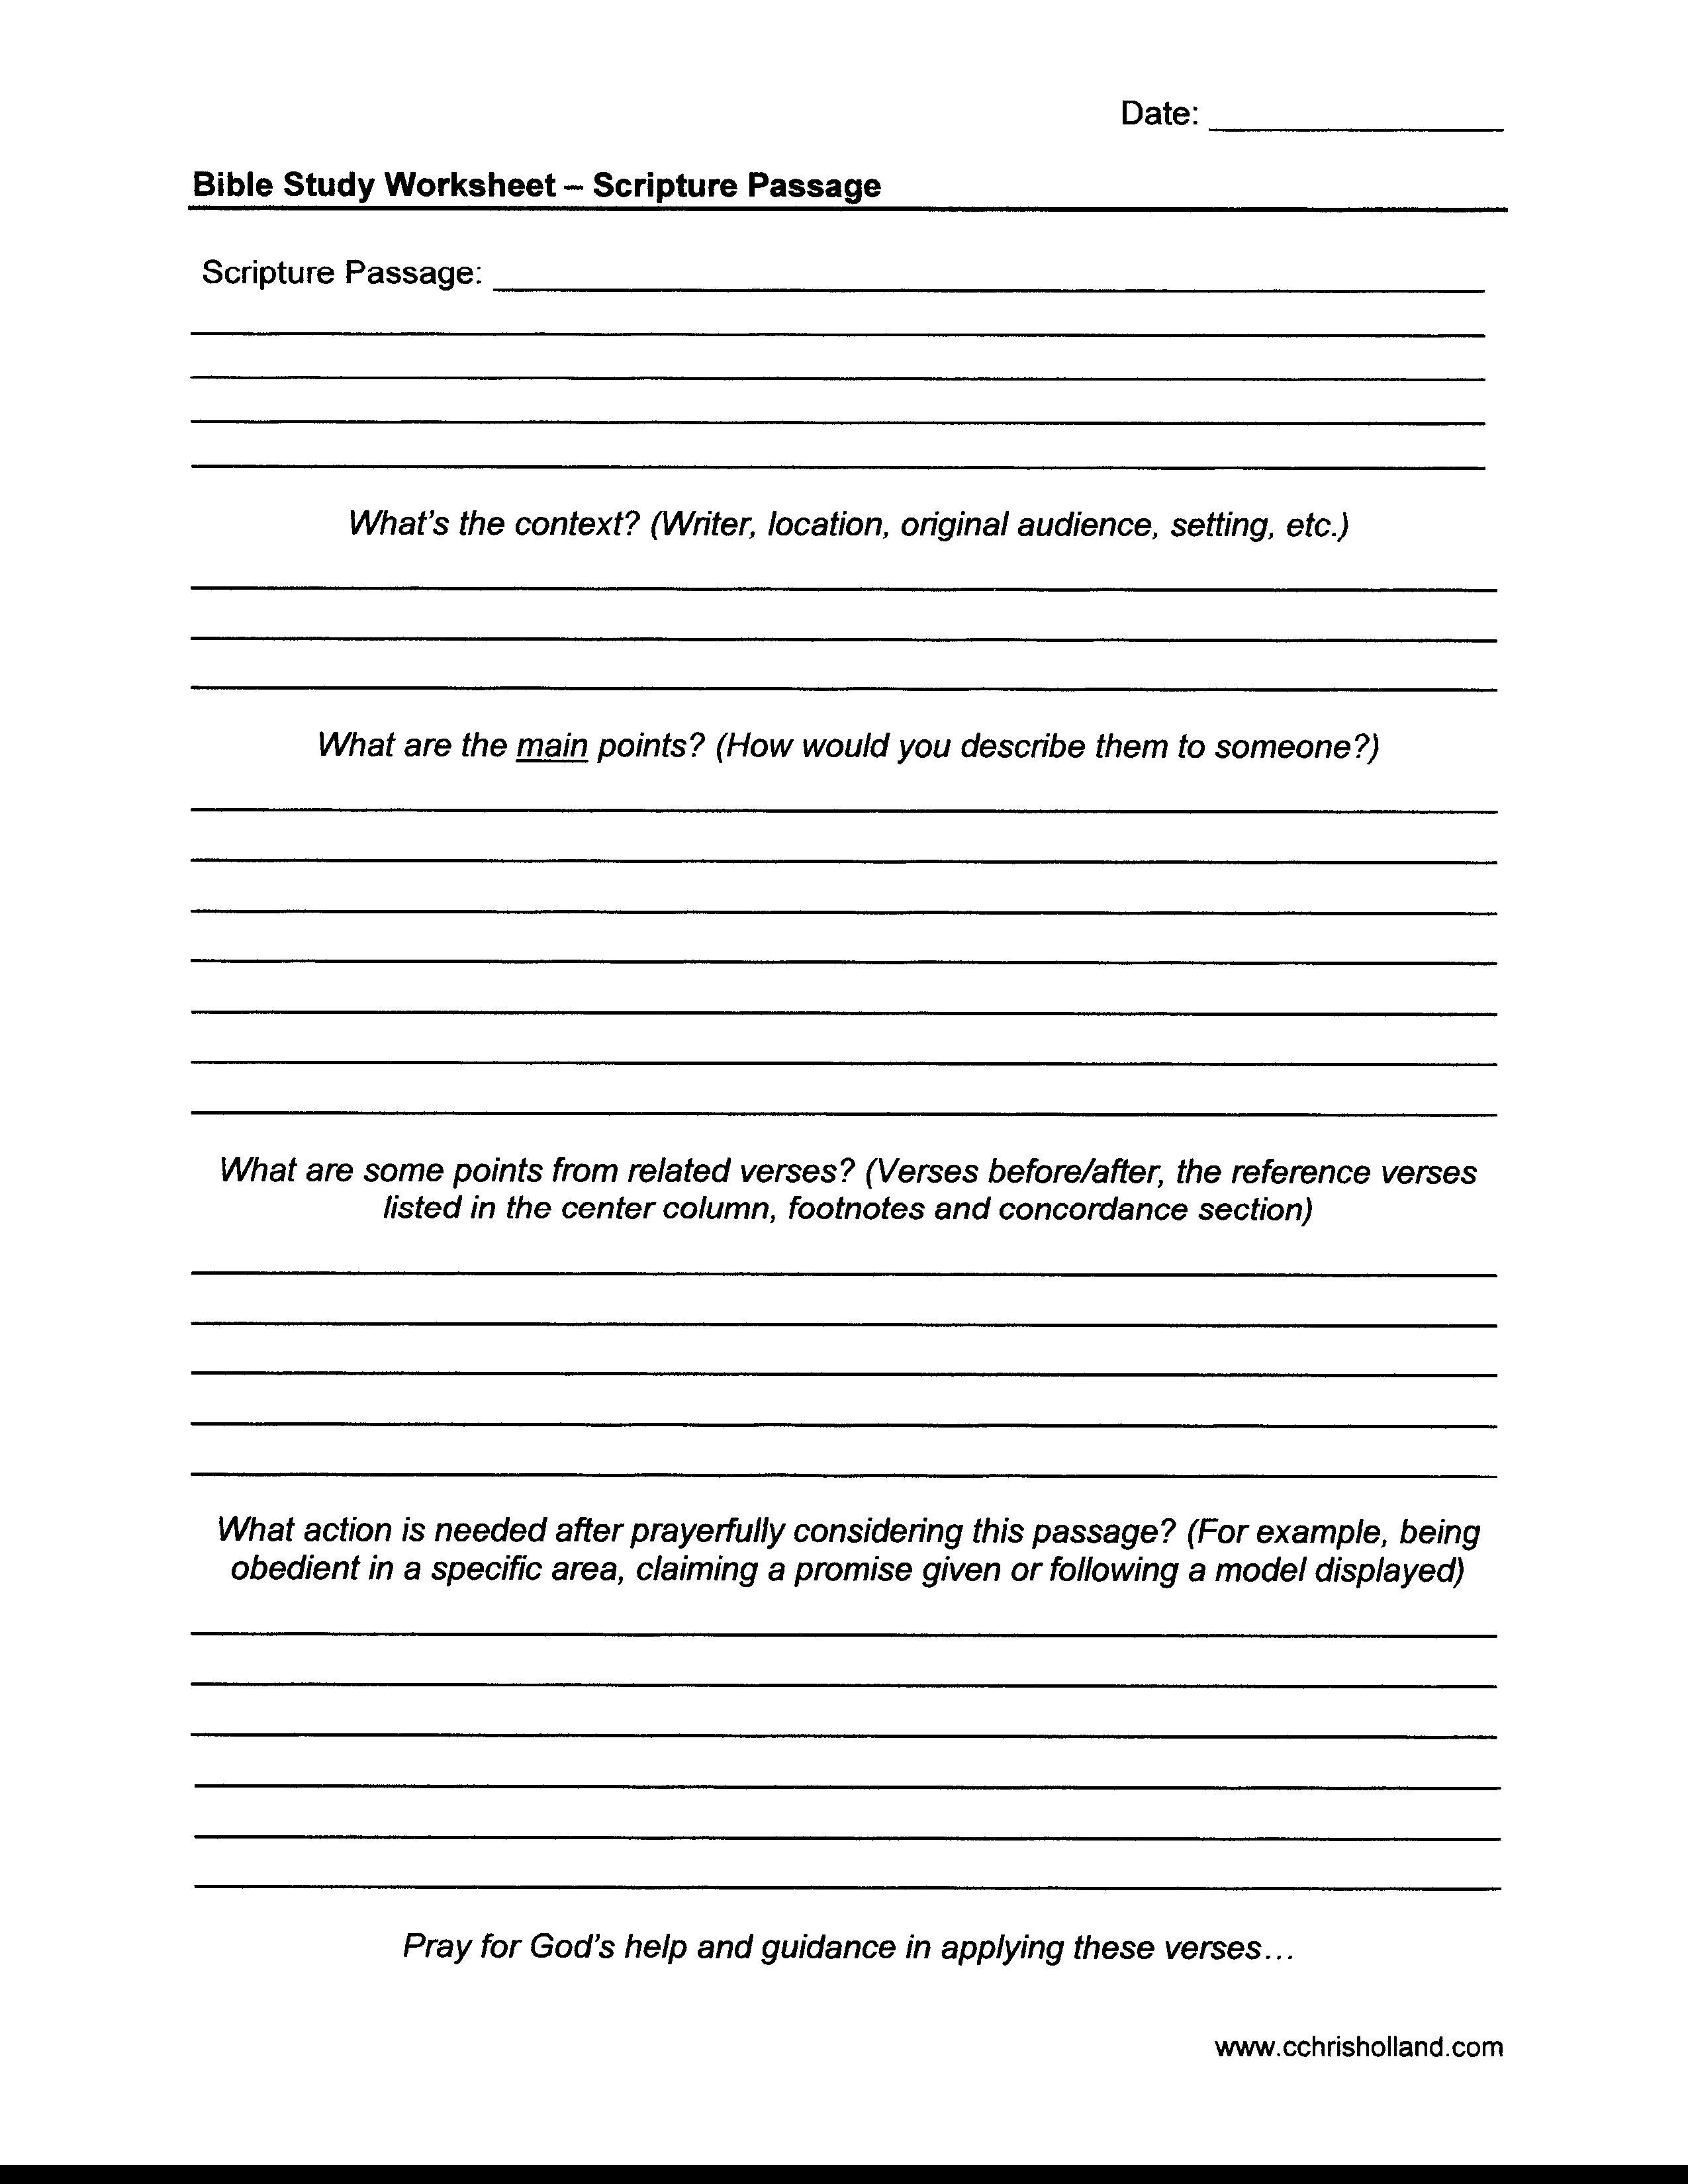 Bible Study Worksheet Forms For Download Organize Planner Free 